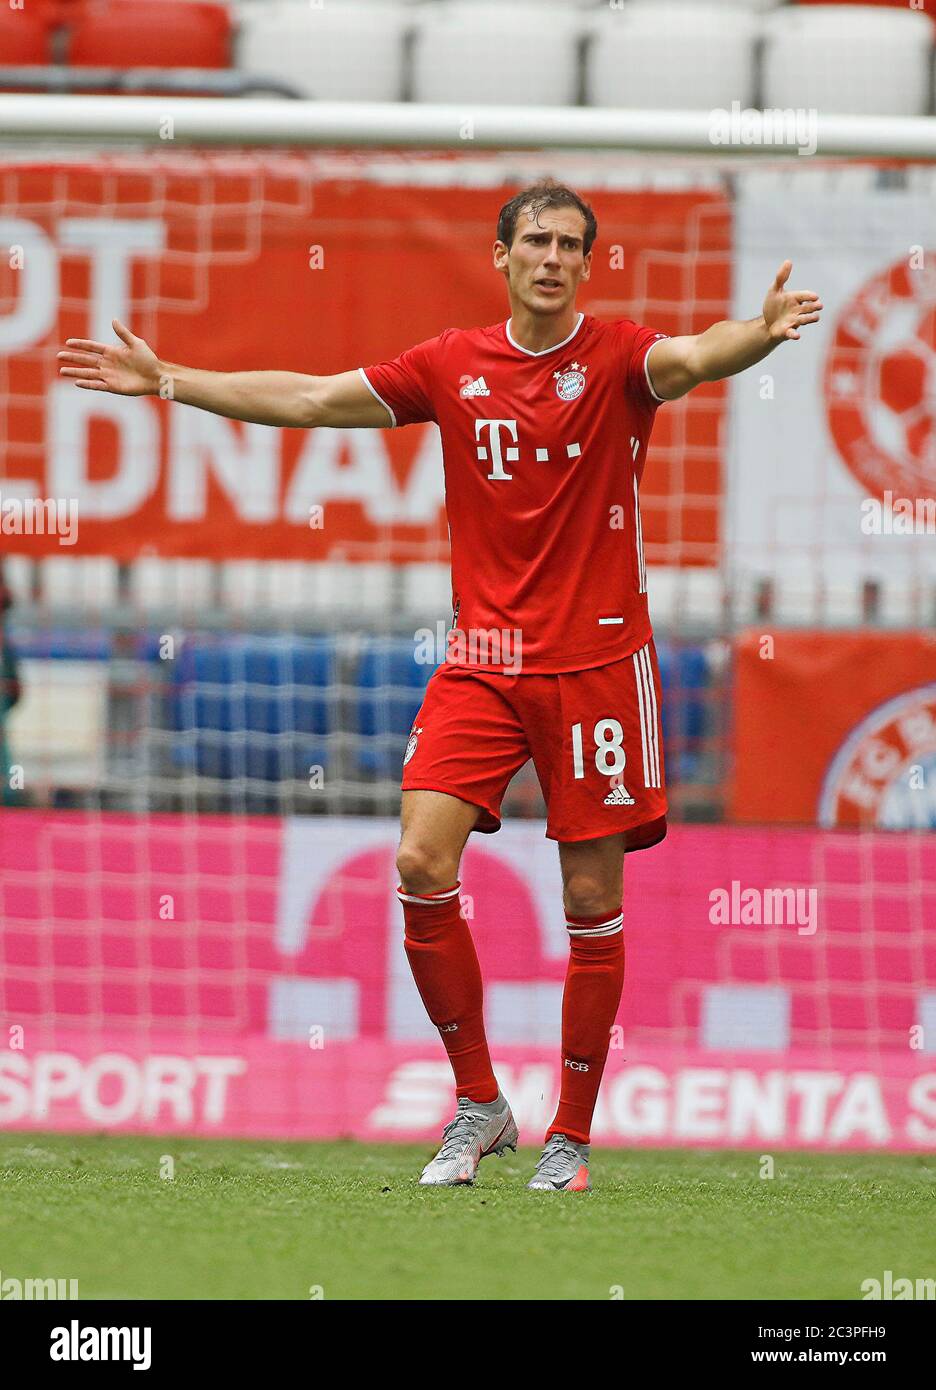 Munich, Germany, 20th June 2020,  Leon GORETZKA, FCB 18 whole figure, action, single image, single action,  at the 1.Bundesliga match  FC BAYERN MUENCHEN - SC FREIBURG in season 2019/2020 am matchday 33. FCB Foto: © Peter Schatz / Alamy Live News / Hans Rauchensteiner/Pool   - DFL REGULATIONS PROHIBIT ANY USE OF PHOTOGRAPHS as IMAGE SEQUENCES and/or QUASI-VIDEO -   National and international News-Agencies OUT  Editorial Use ONLY Stock Photo